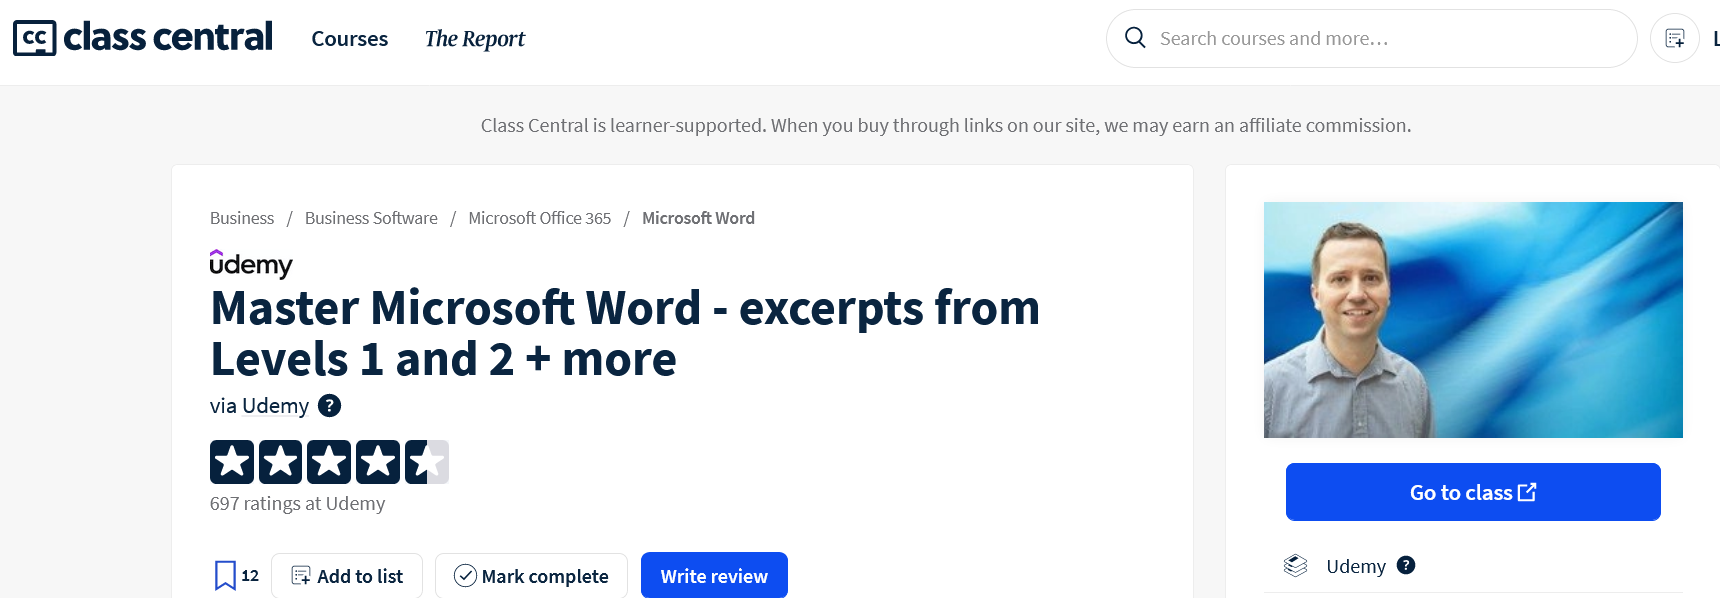 Master Microsoft Word – excerpts from Levels 1 and 2 + more